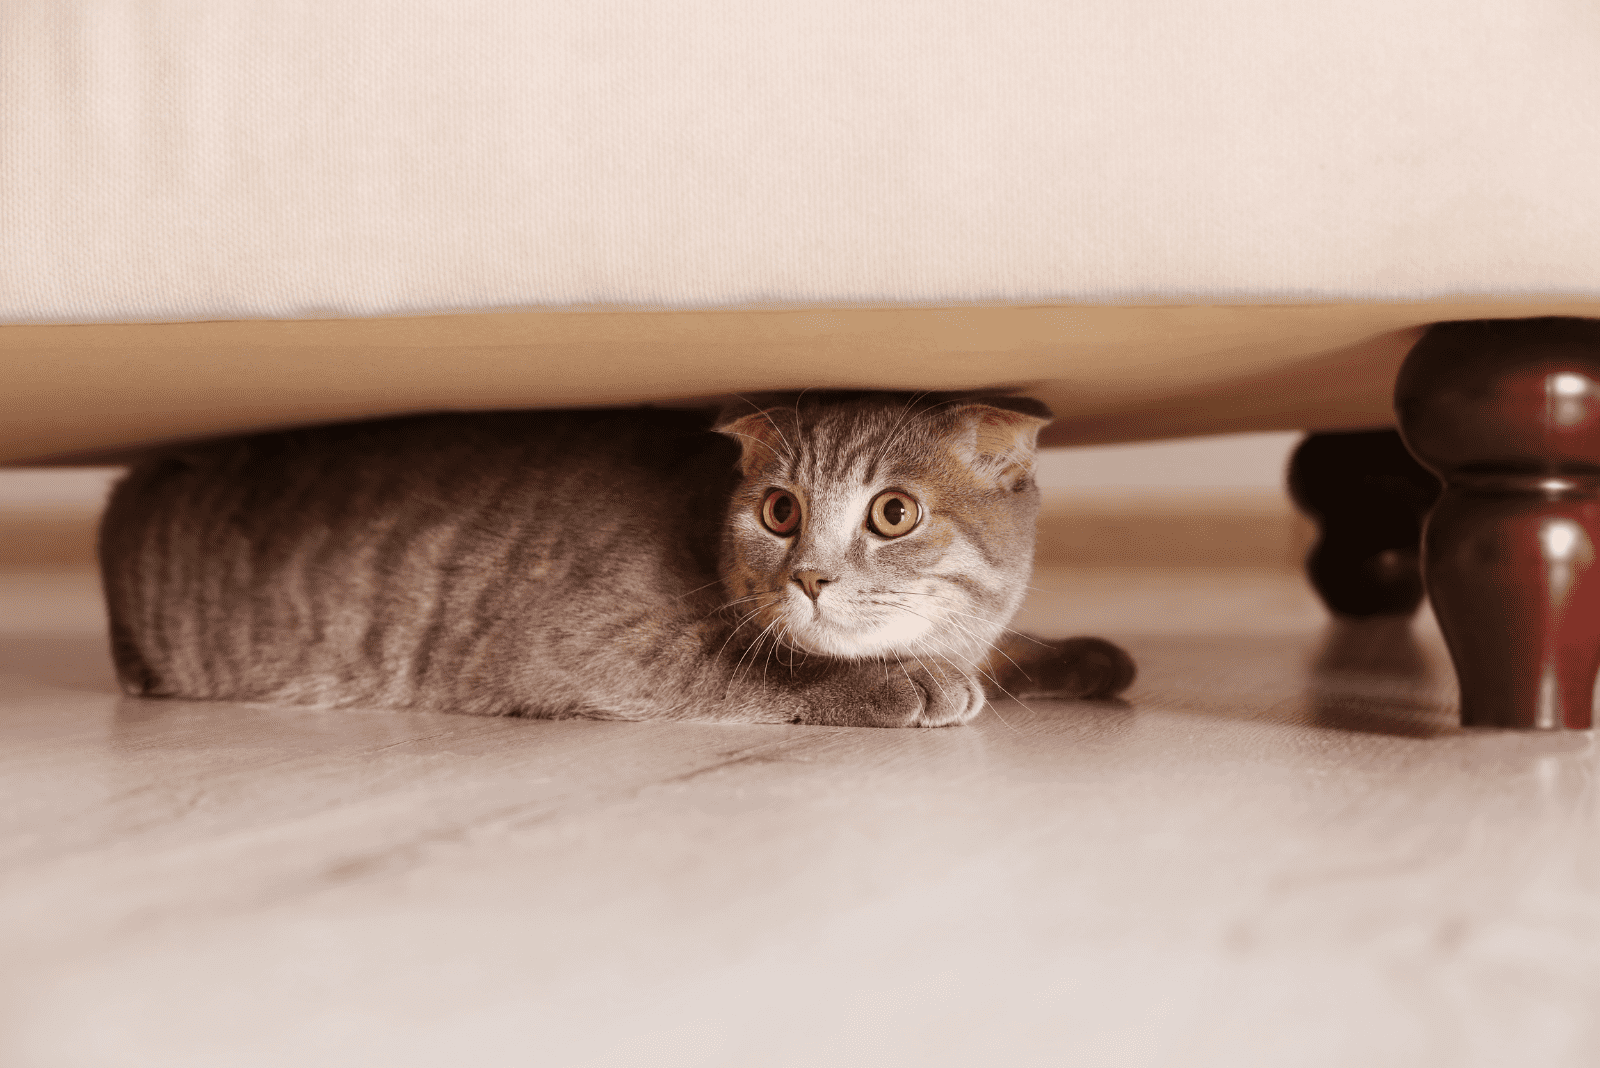 the cat is hiding under the bed